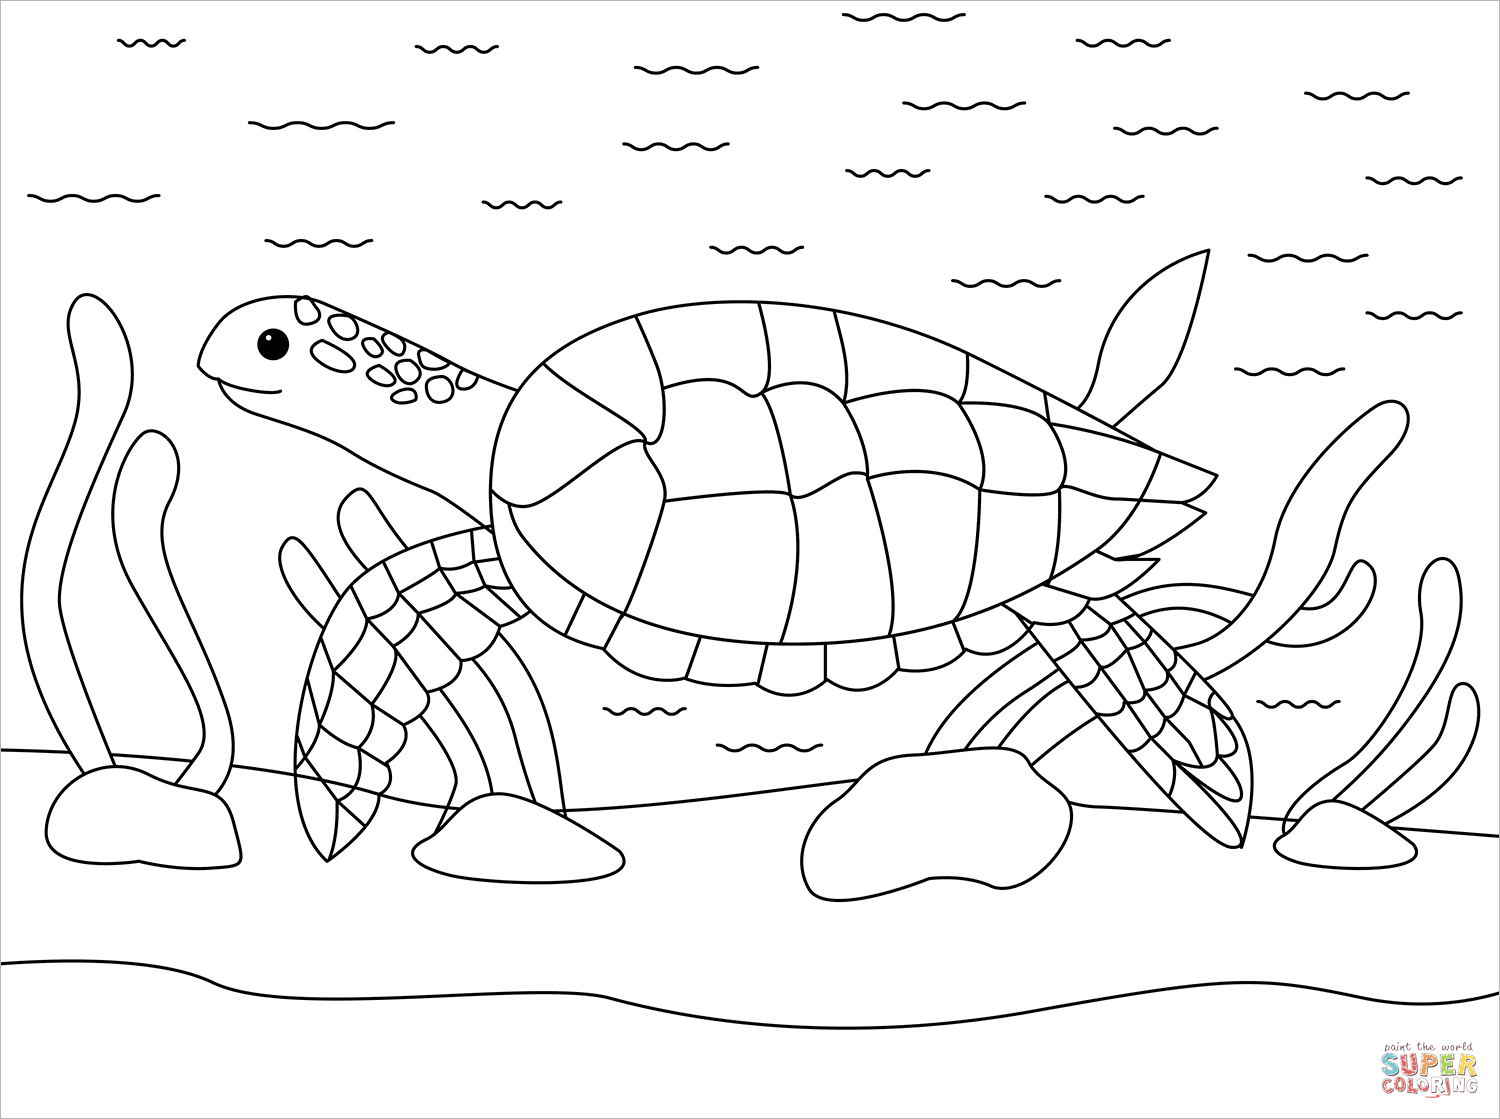 Turtle coloring page free printable coloring pages